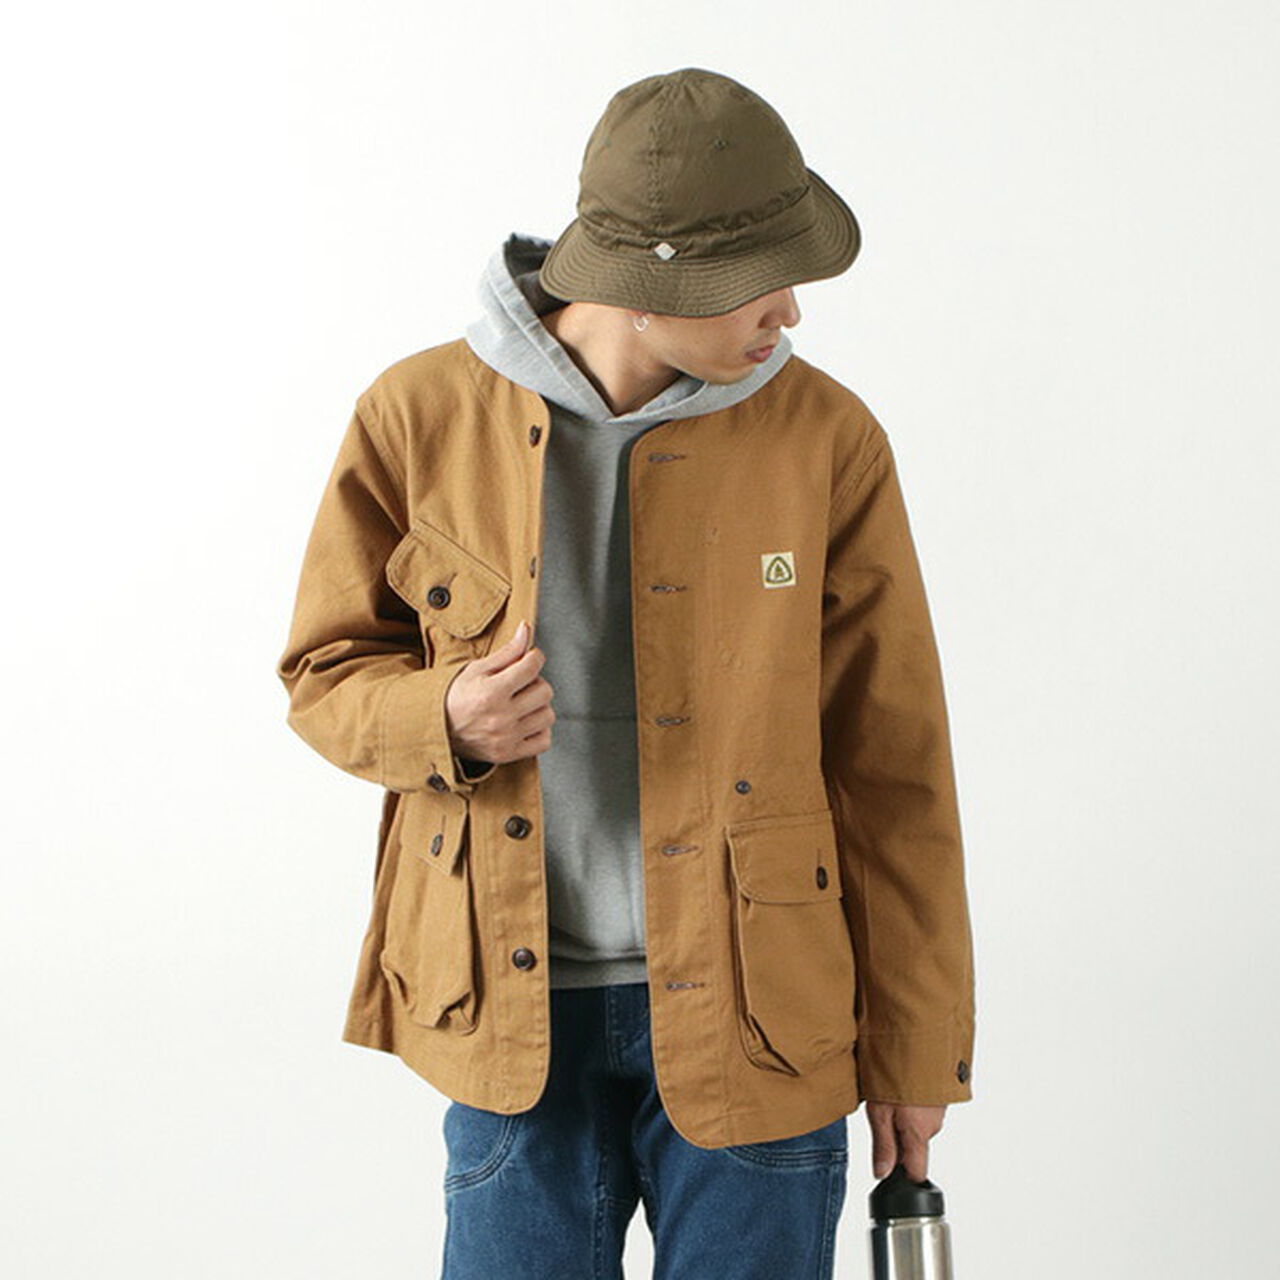 Hemp Fireproof Mighty Jacket with Multi Apron,Brown, large image number 0